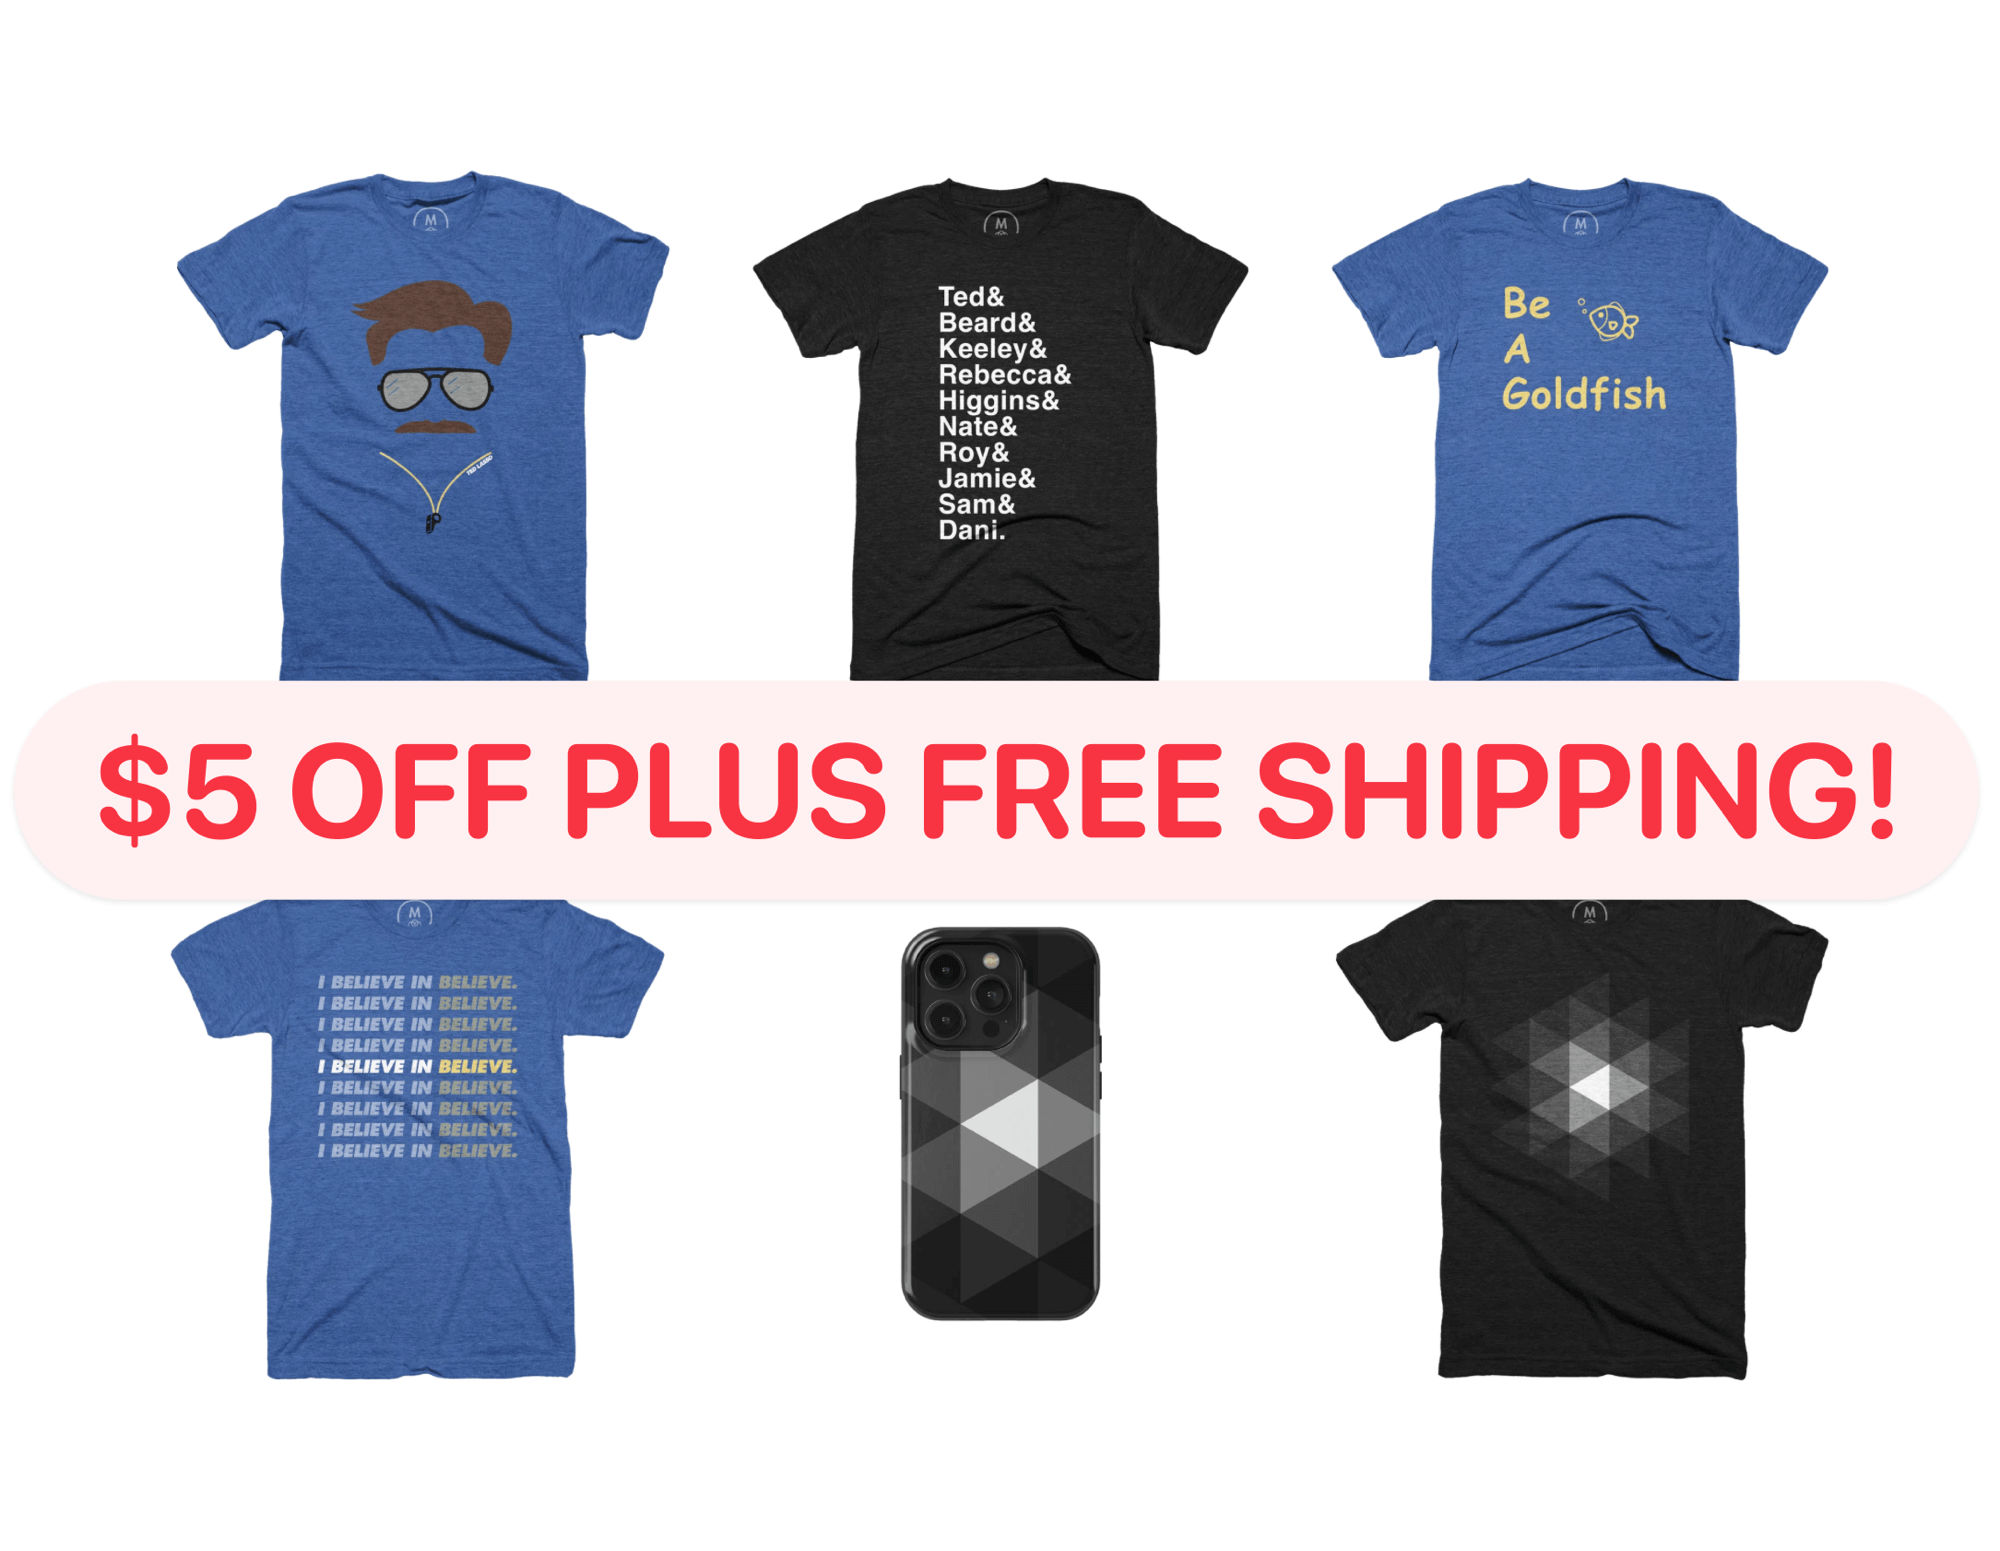 A sample of my t-shirt designs with a large banner stating “$5 off plus free shipping”.